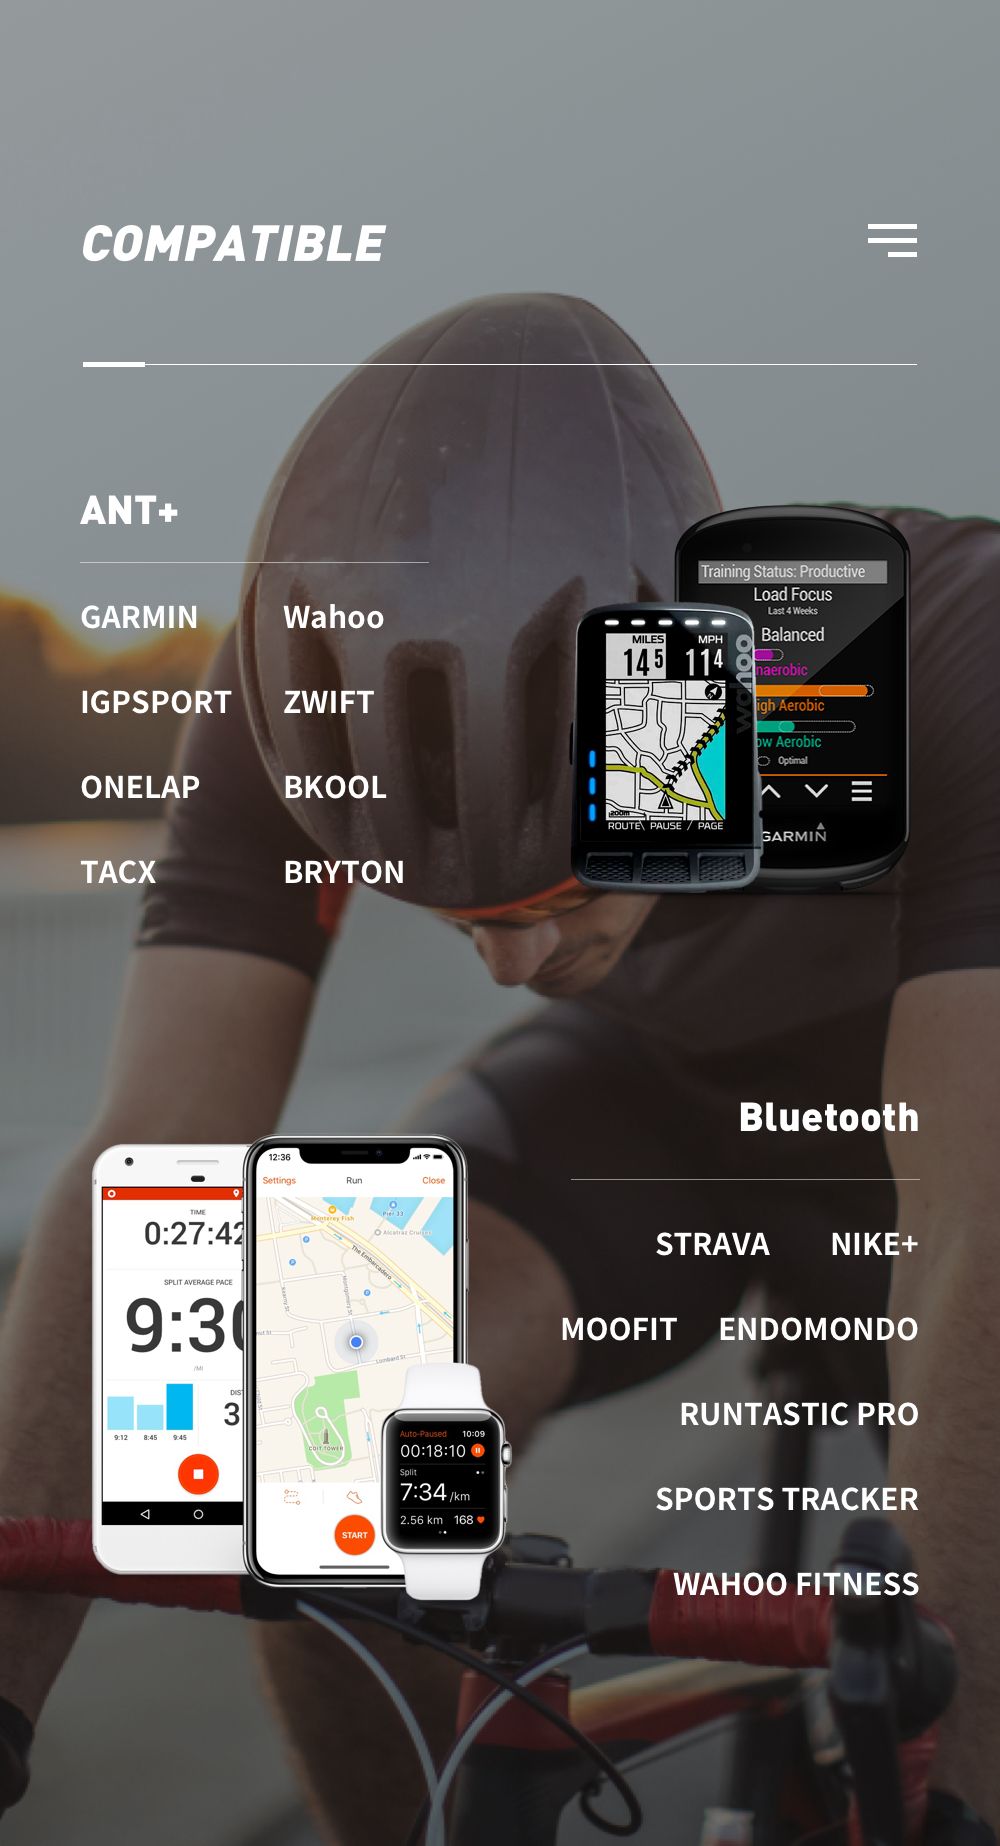 Magene-Mover-H64-Dual-Mode-ANT--Bluetooth-40-Heart-Rate-Sensor-With-Chest-Strap-Computer-Bike-Wahoo--1682570